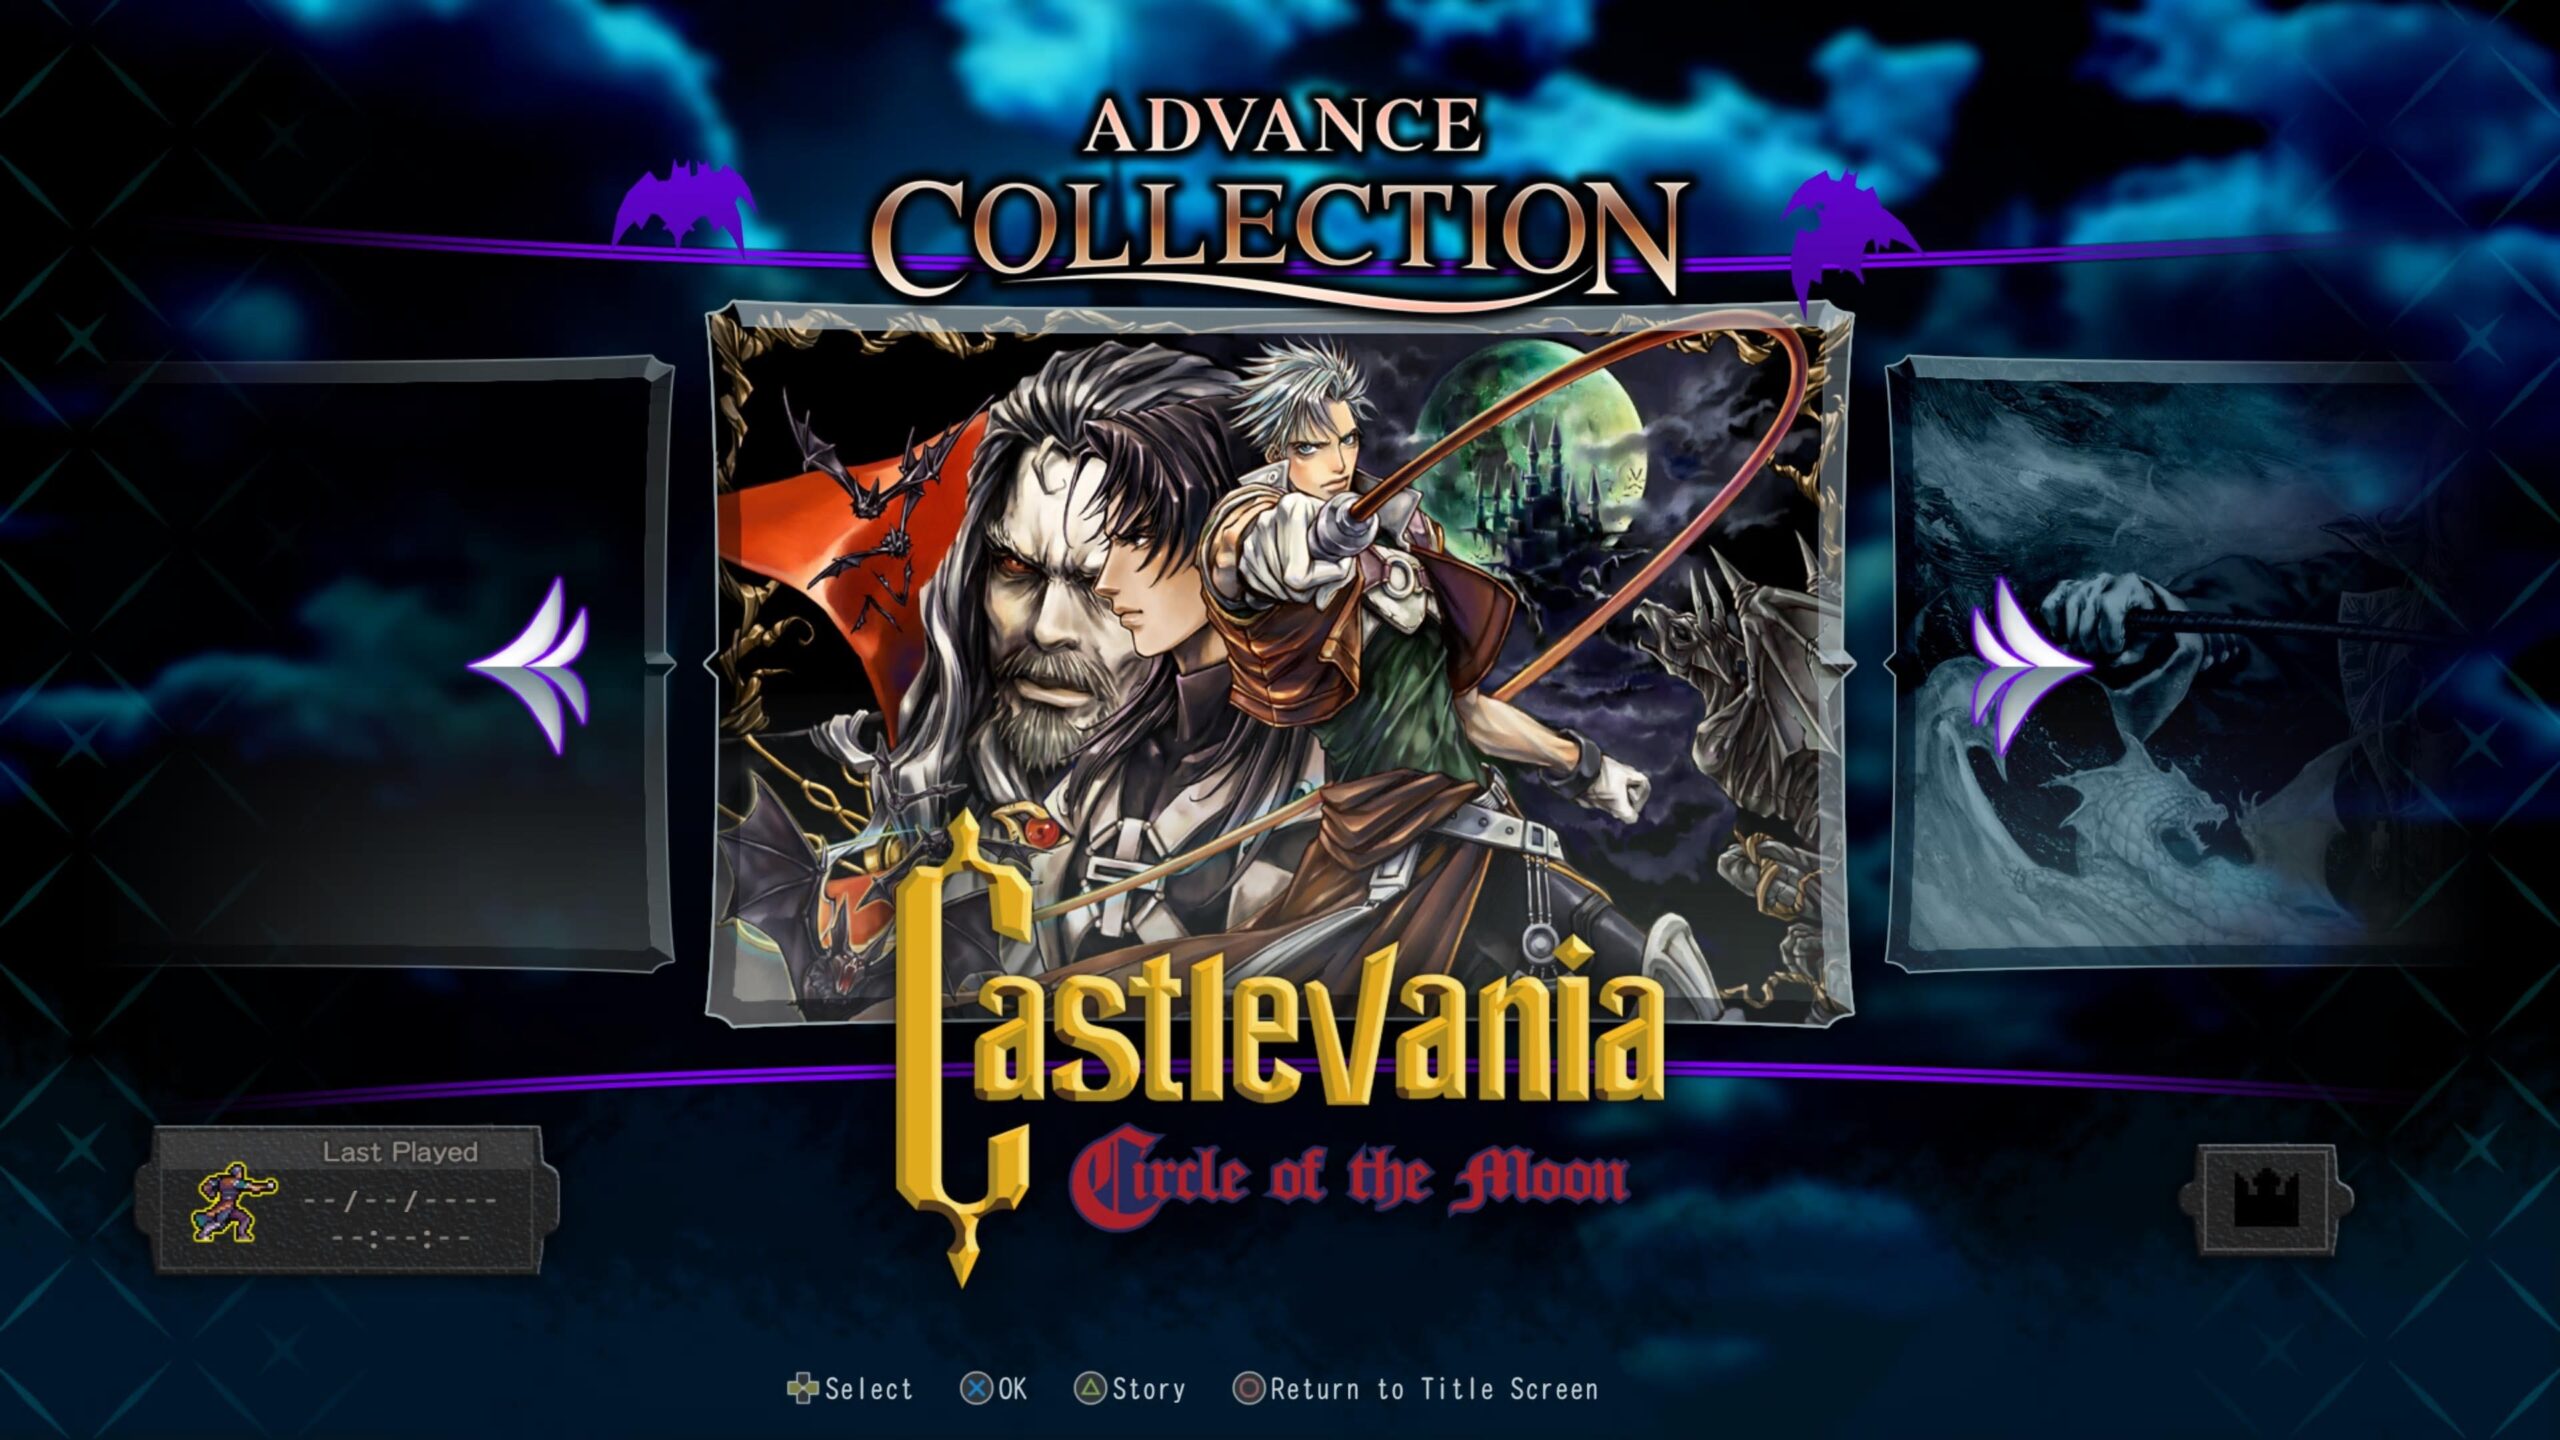 Castlevania advance collection. Castlevania Advanced collection. Кастлевания свитч. Castlevania Advance. Castlevania Advance collection game.